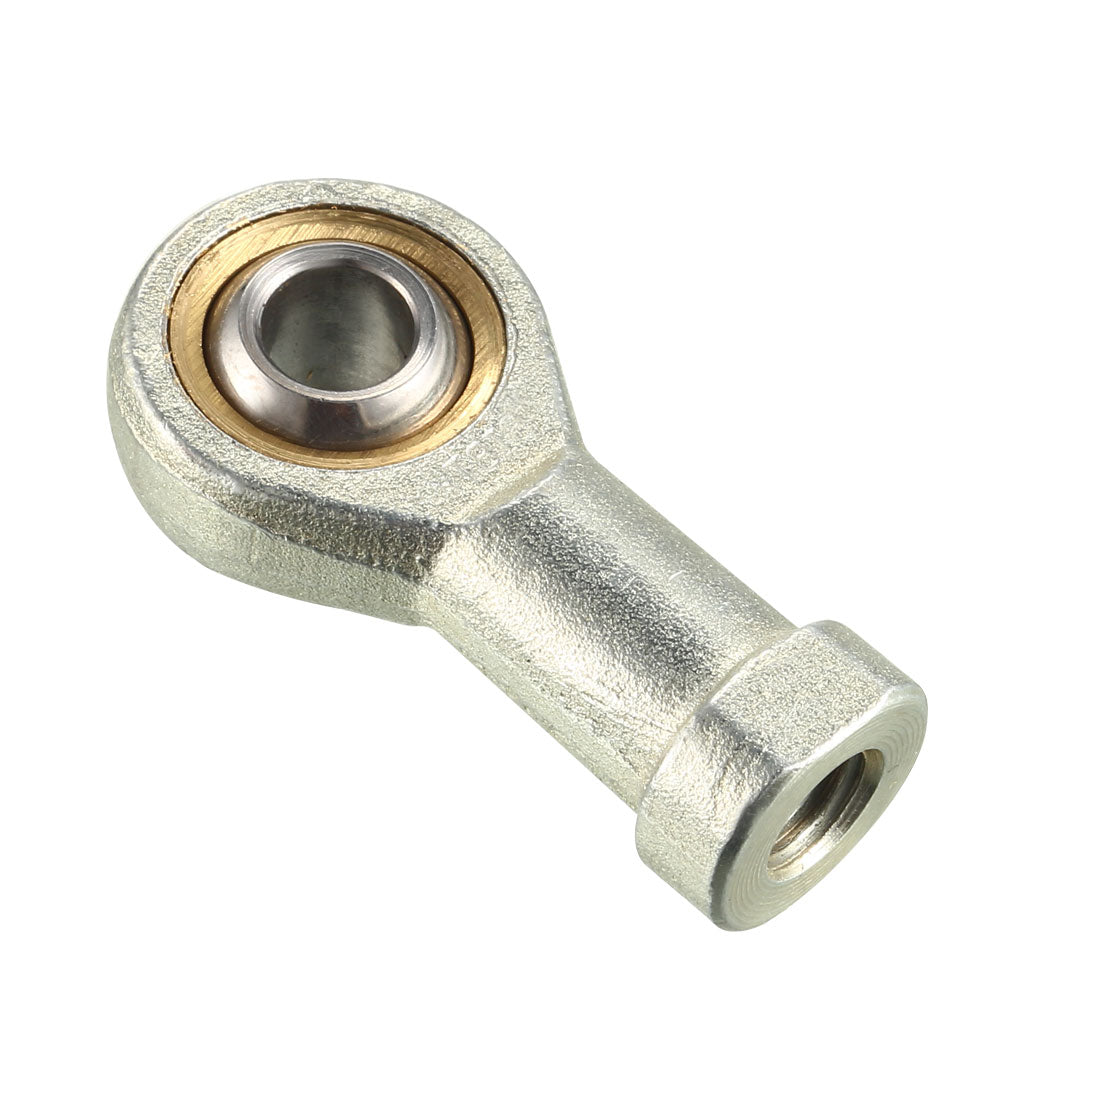 uxcell Uxcell 8mm Rod End Bearing M8x1.25mm Rod Ends Ball Joint Female Right Hand Thread